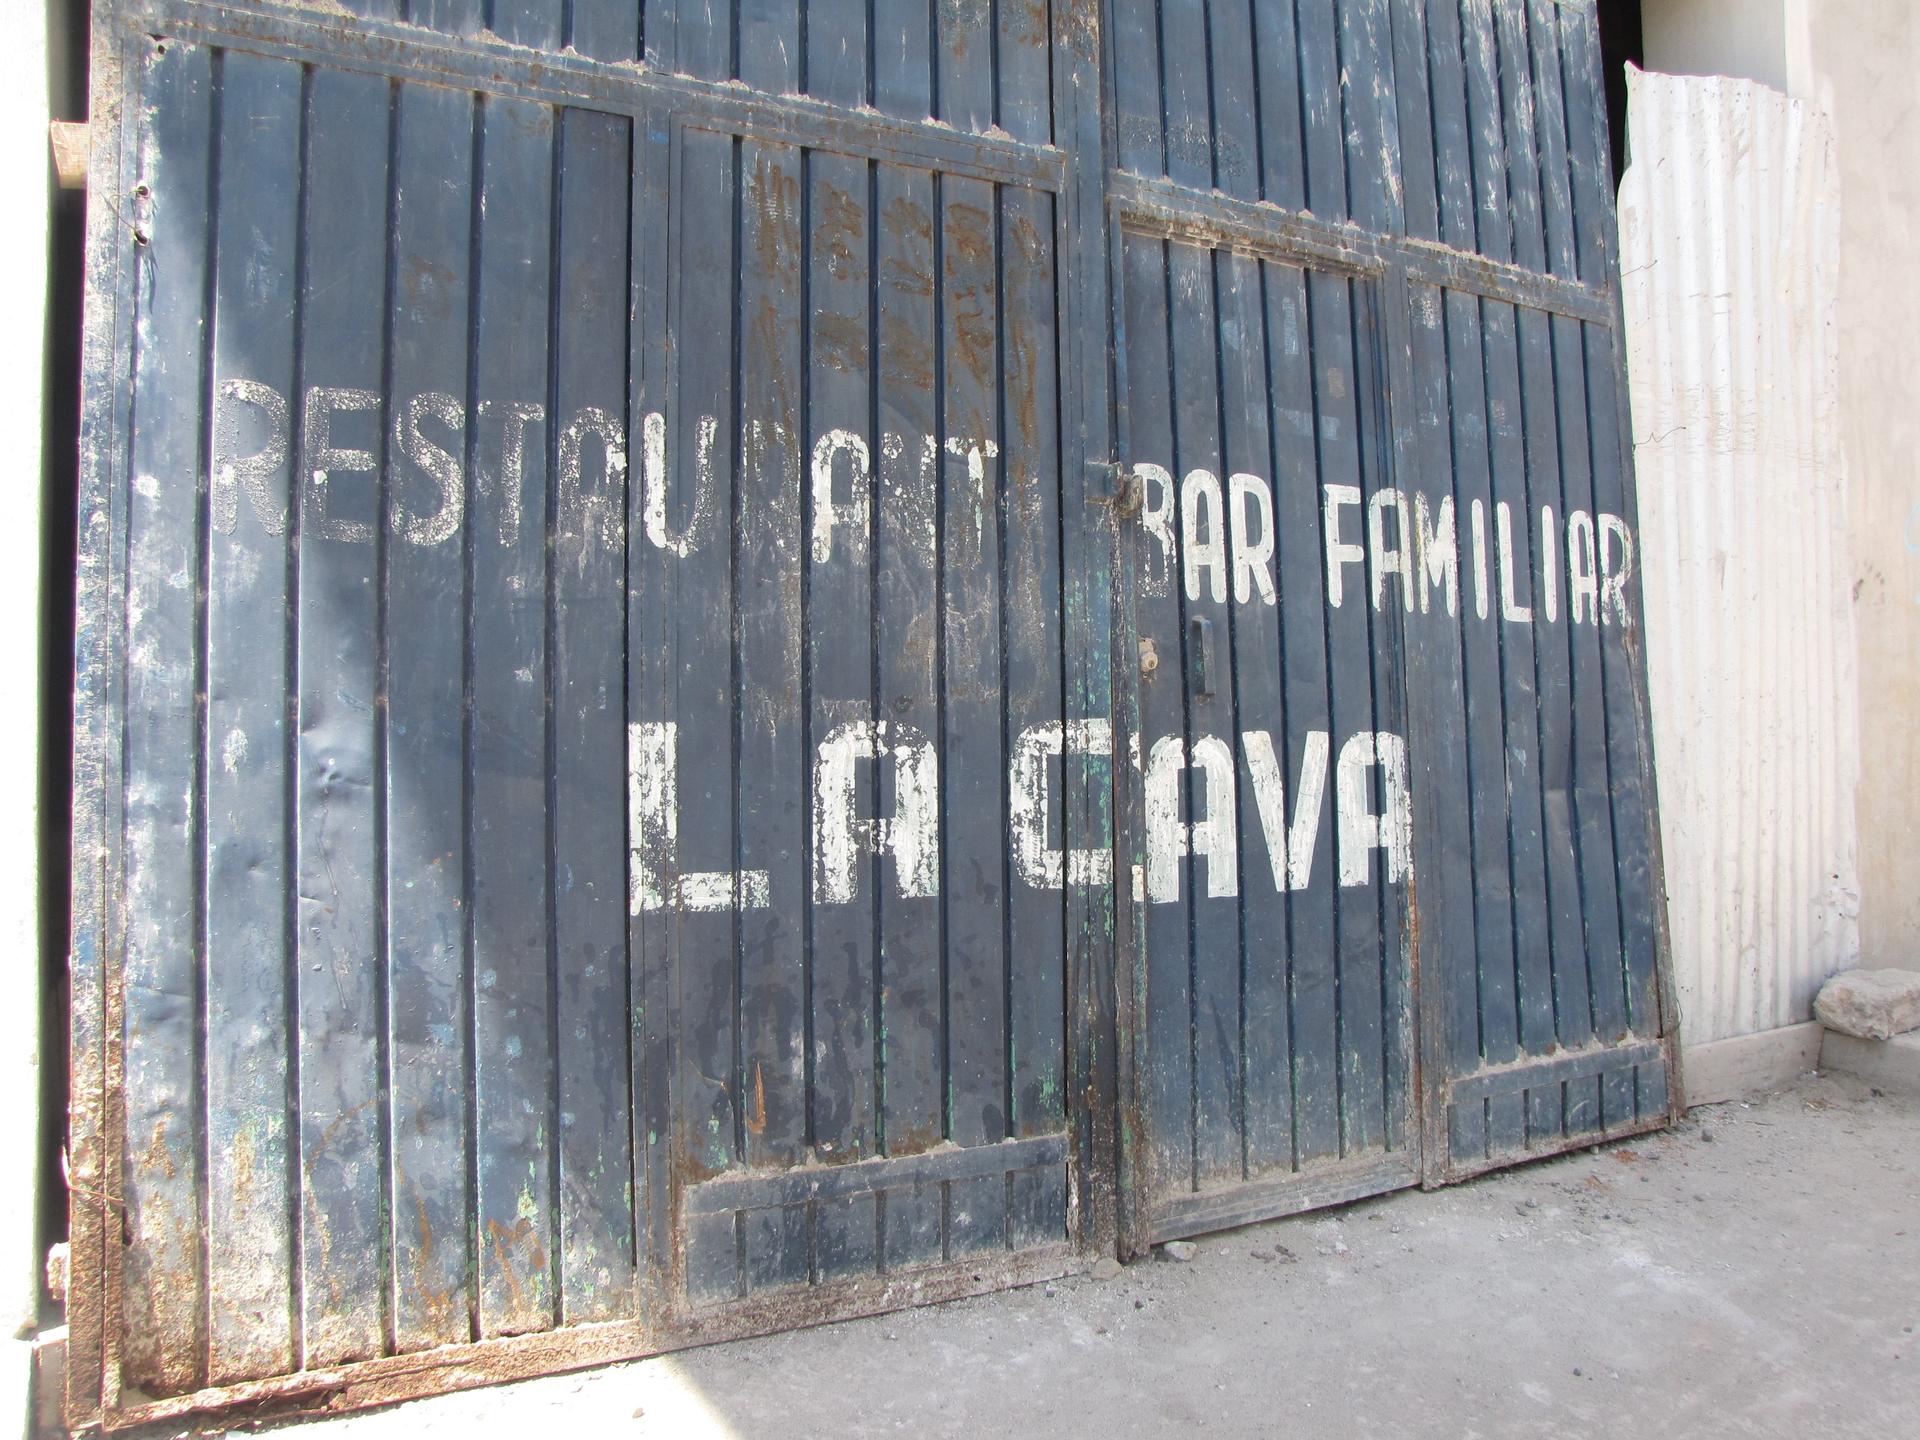 The outside door of the bar Mona worked in after arriving in Frontera Comalapa, Mexico.